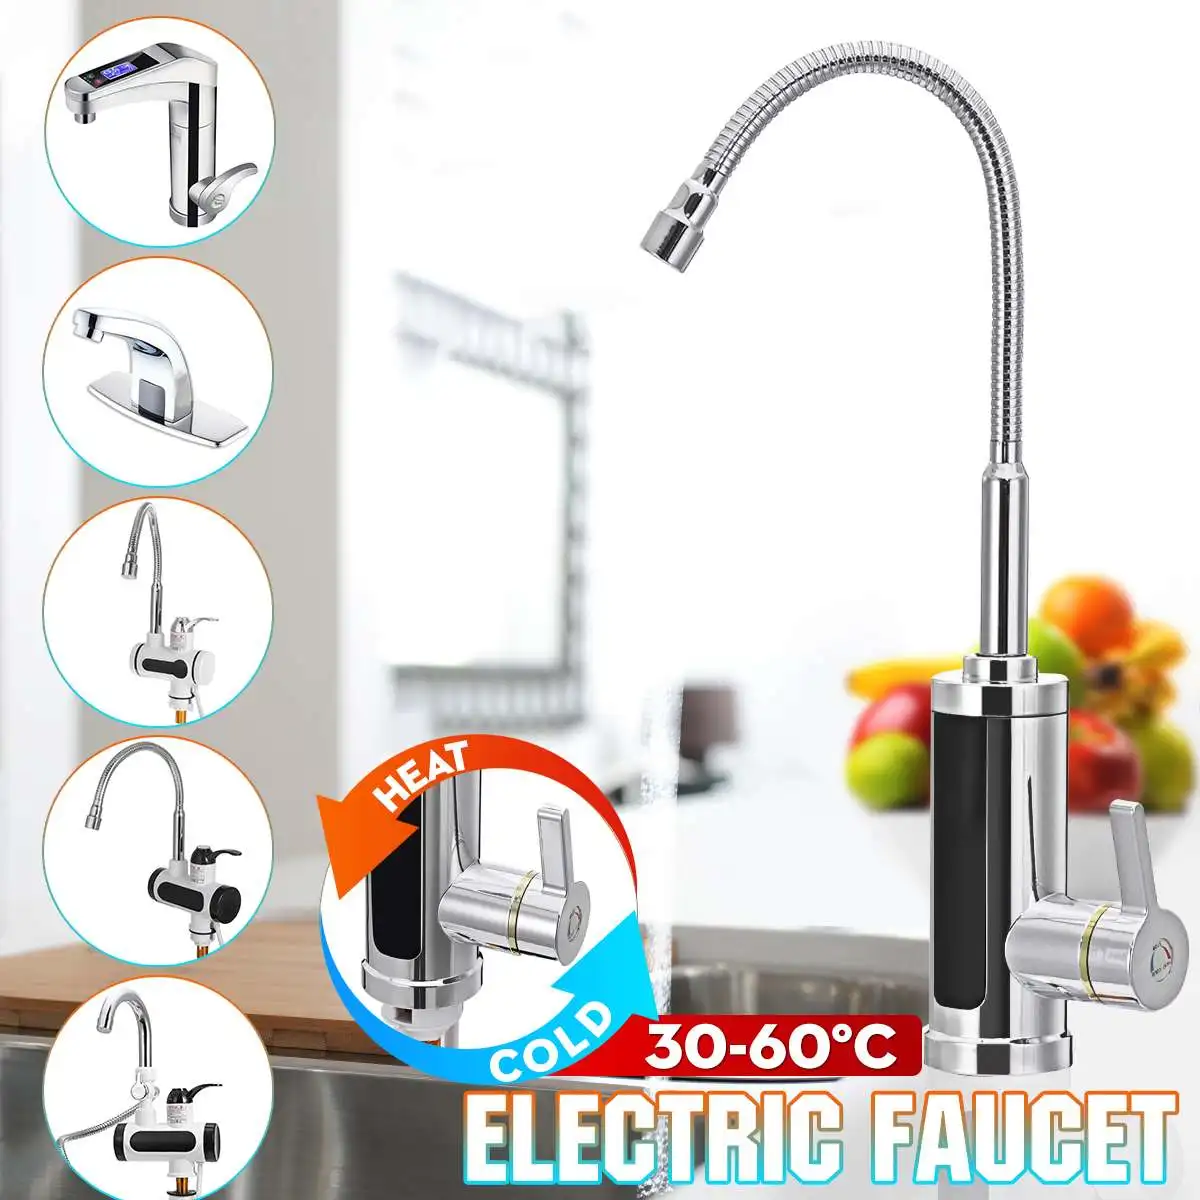 

3000W 220V Electric Kitchen Flow Water Heater Tap Instant Hot Water Faucet Heater Cold Heating Tankless Water Heater with LED